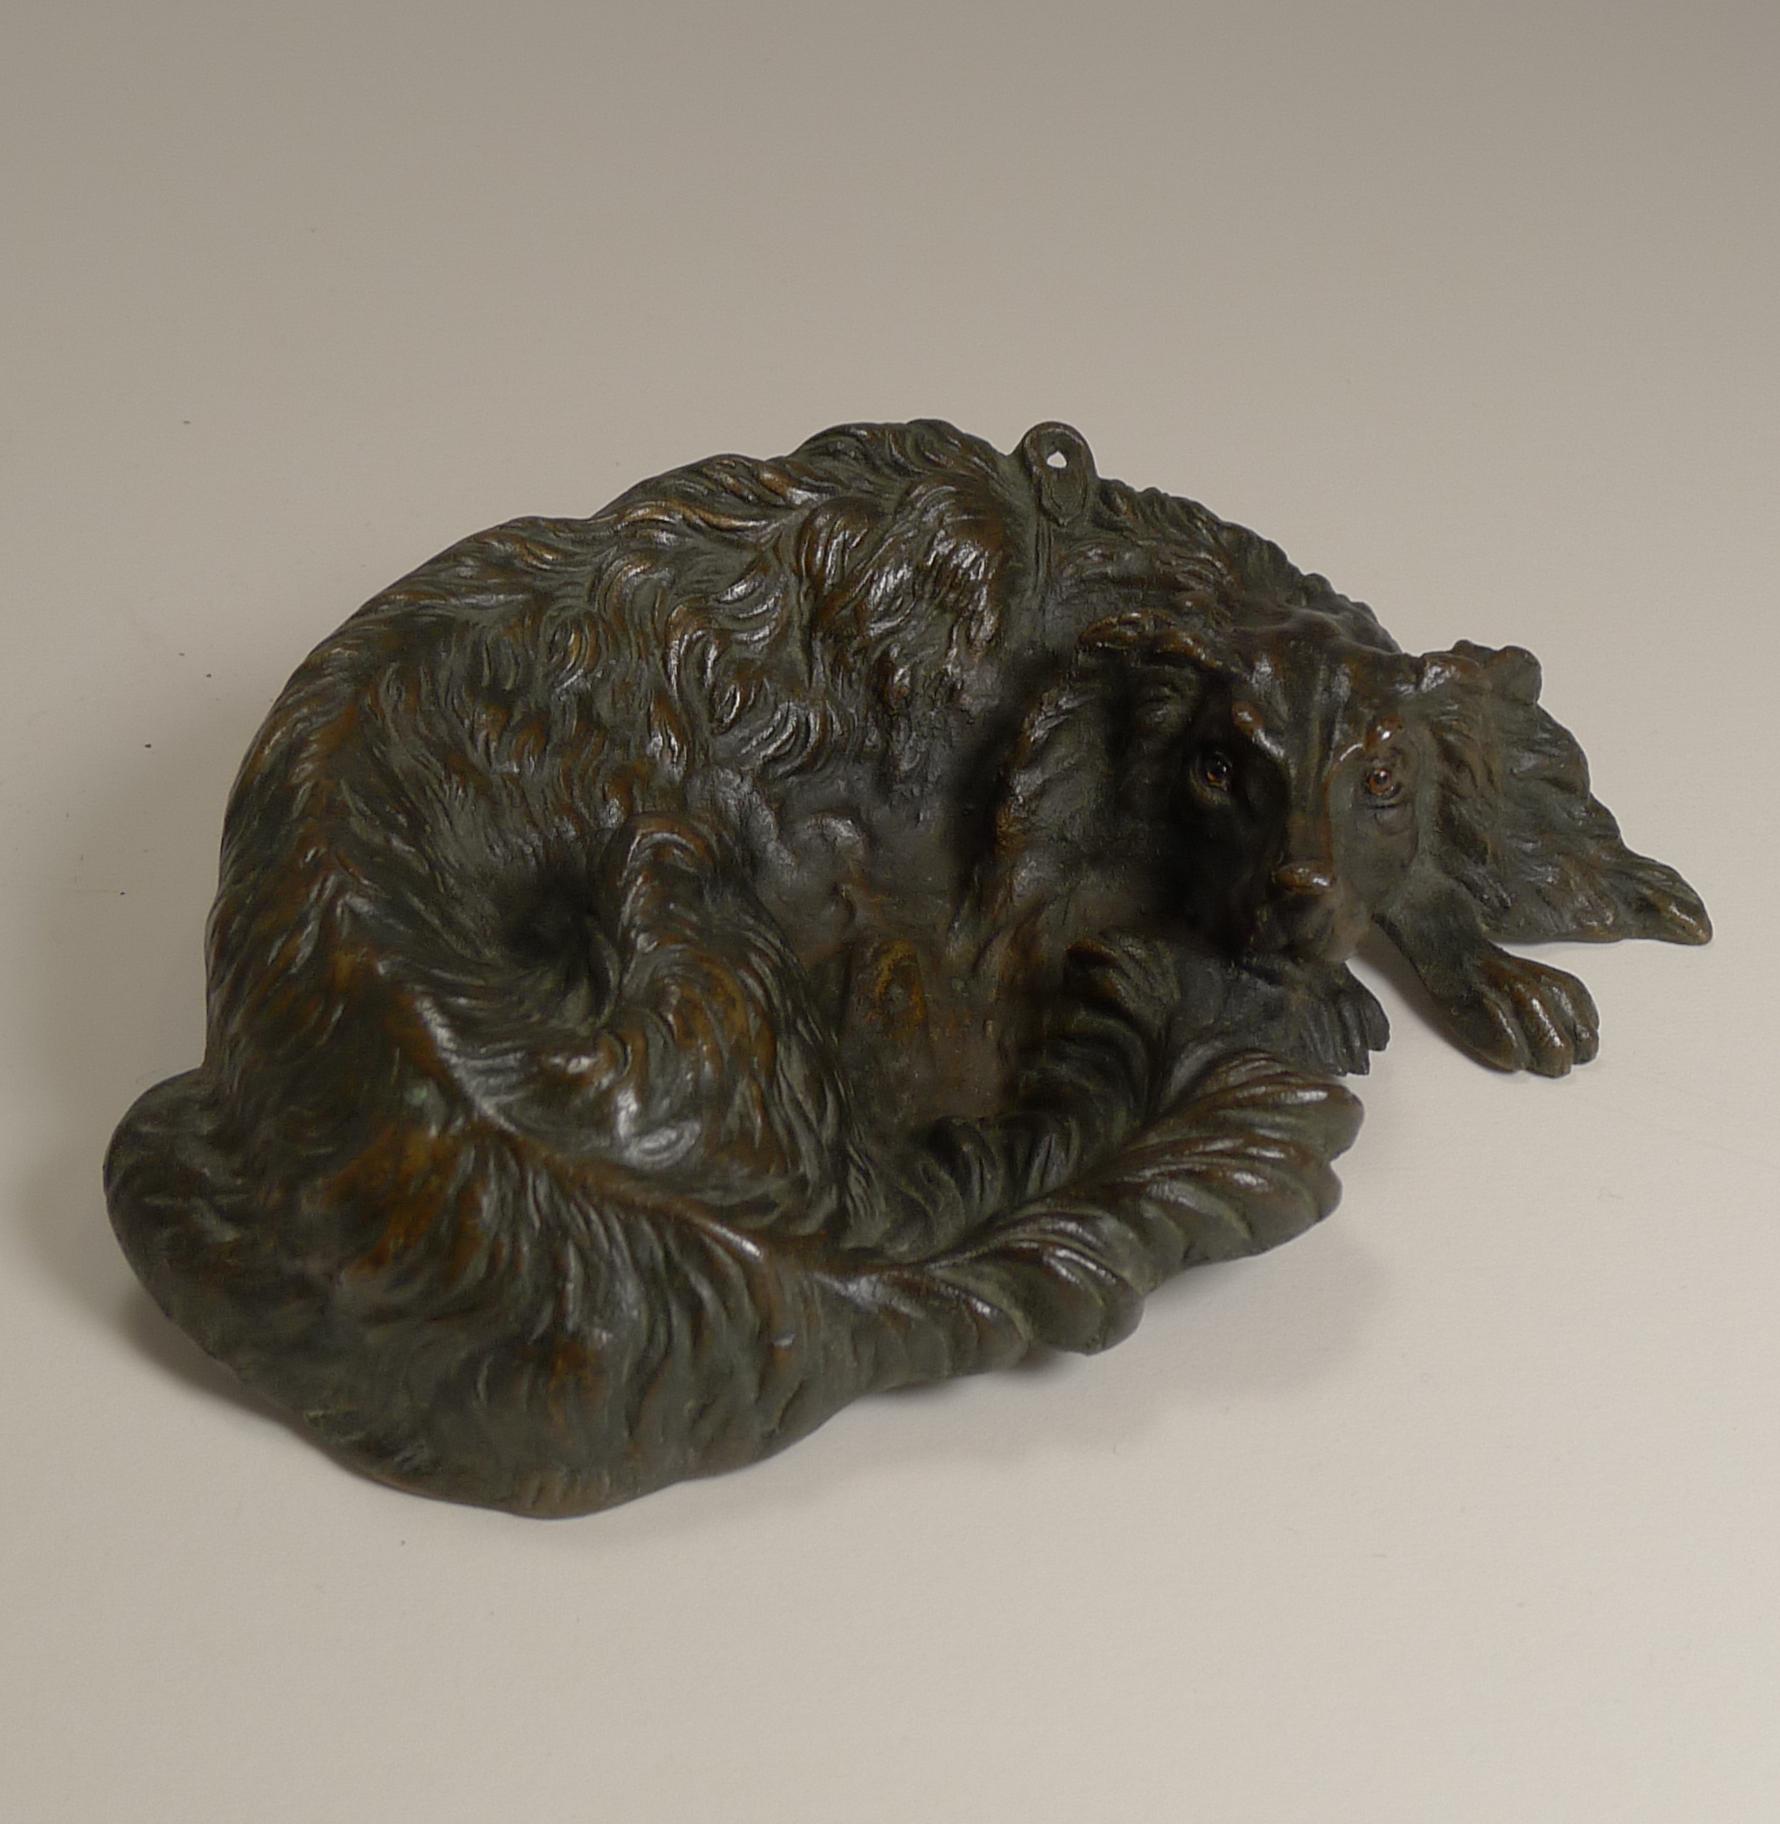 Beautiful and charming, this canine Vide Poche (empty pocket) dish.

Of course what makes this so special is the lovely dog form cast from bronze, probably Austrian, could be English, the dog looks very much like a Spaniel, and retains the two